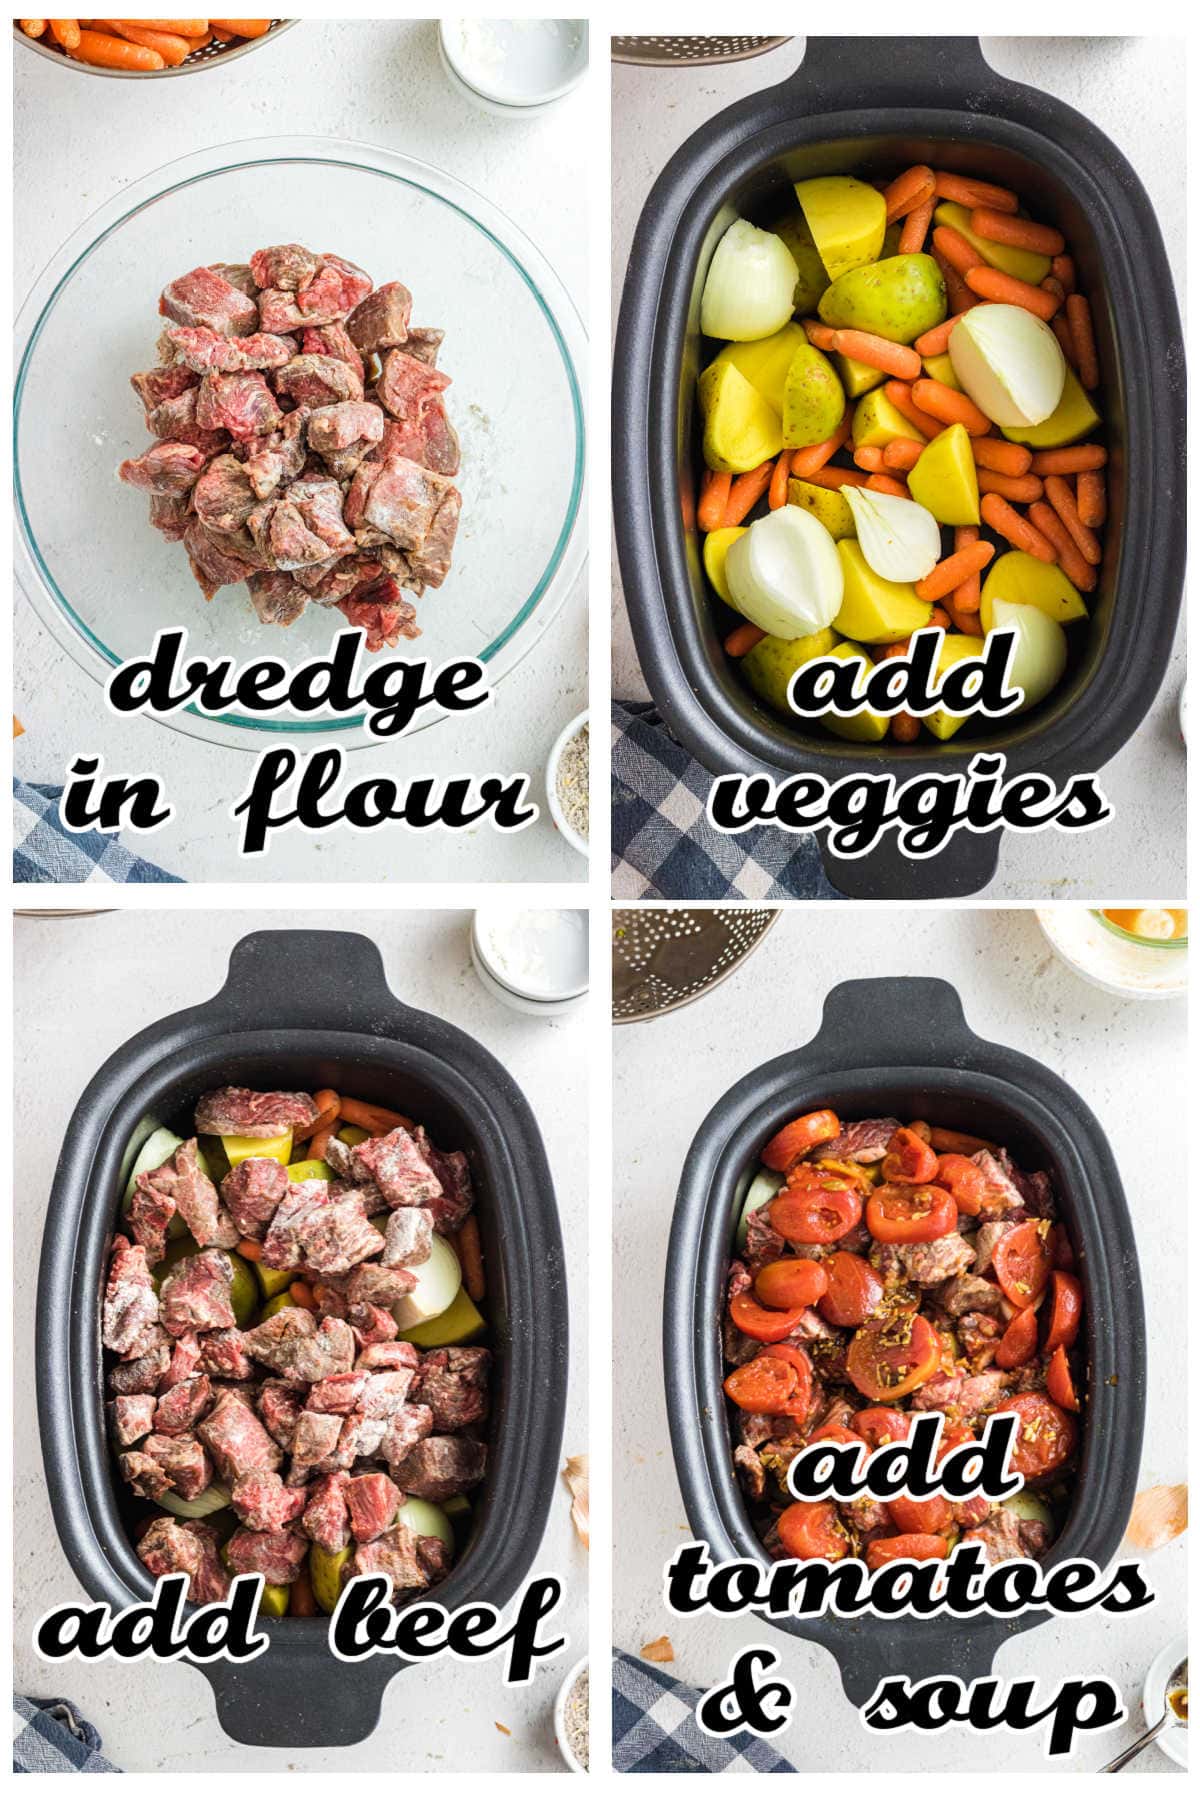 Step by step images showing how to make beef stew.